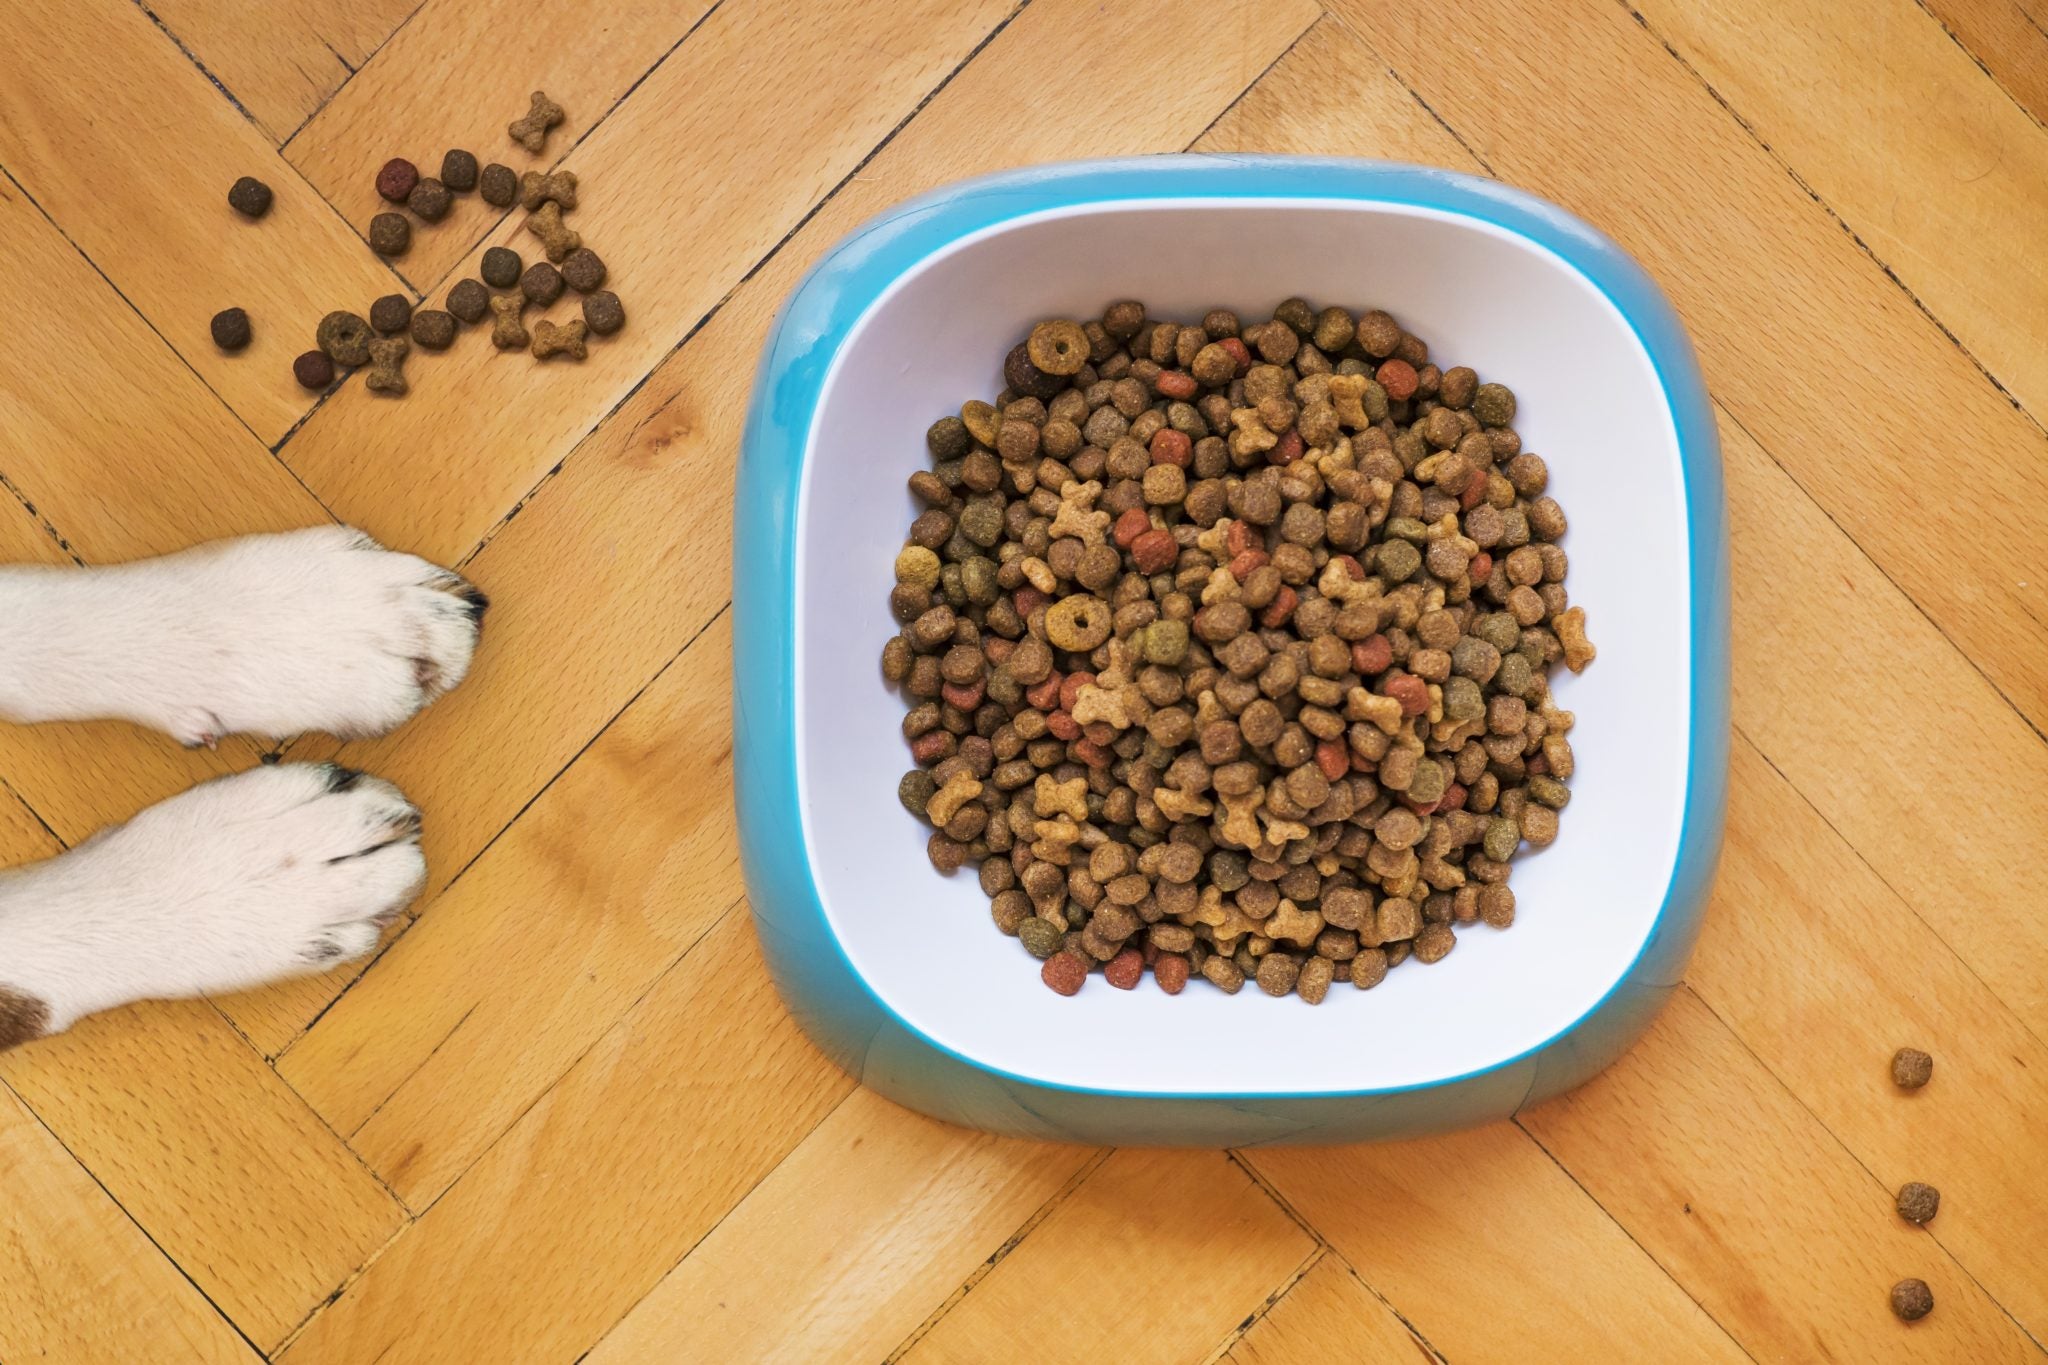 How to Properly Store Pet Food